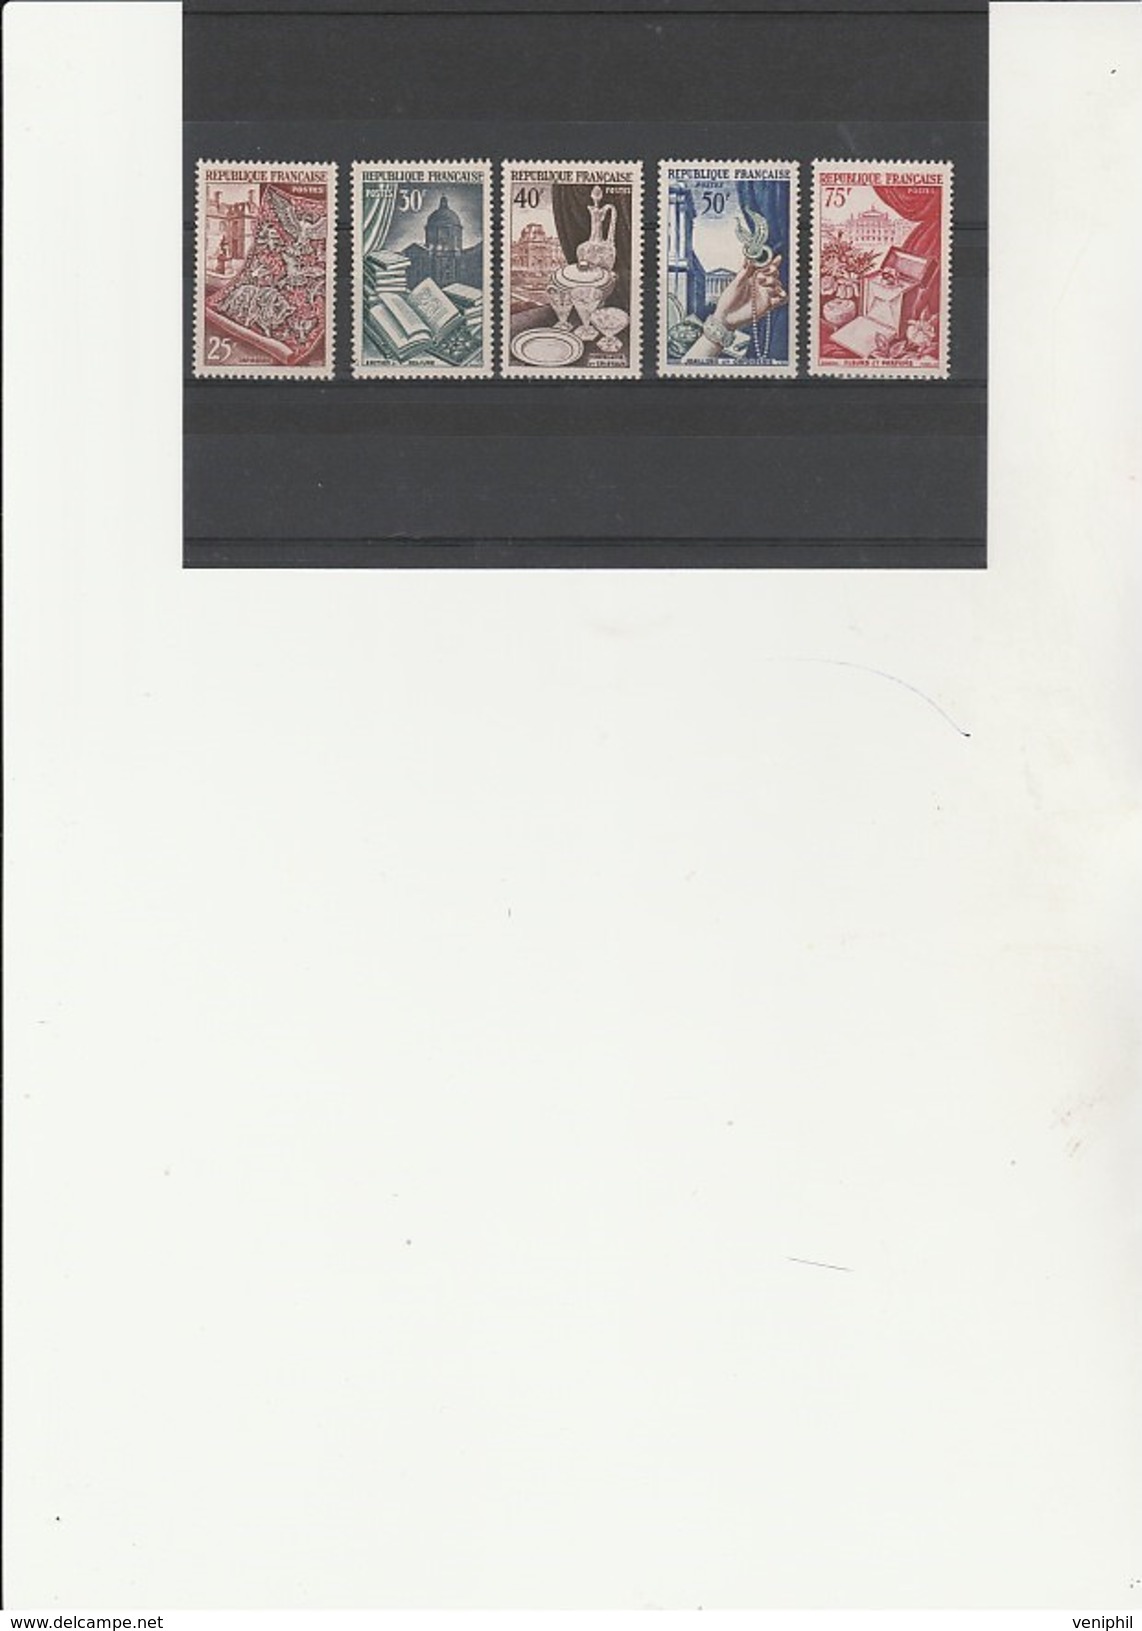 TIMBRES  METIERS D'ART - N° 970 A 974 NEUF XX SANS CHARNIERE -ANNEE 1954  - COTE : 45 € - Unused Stamps